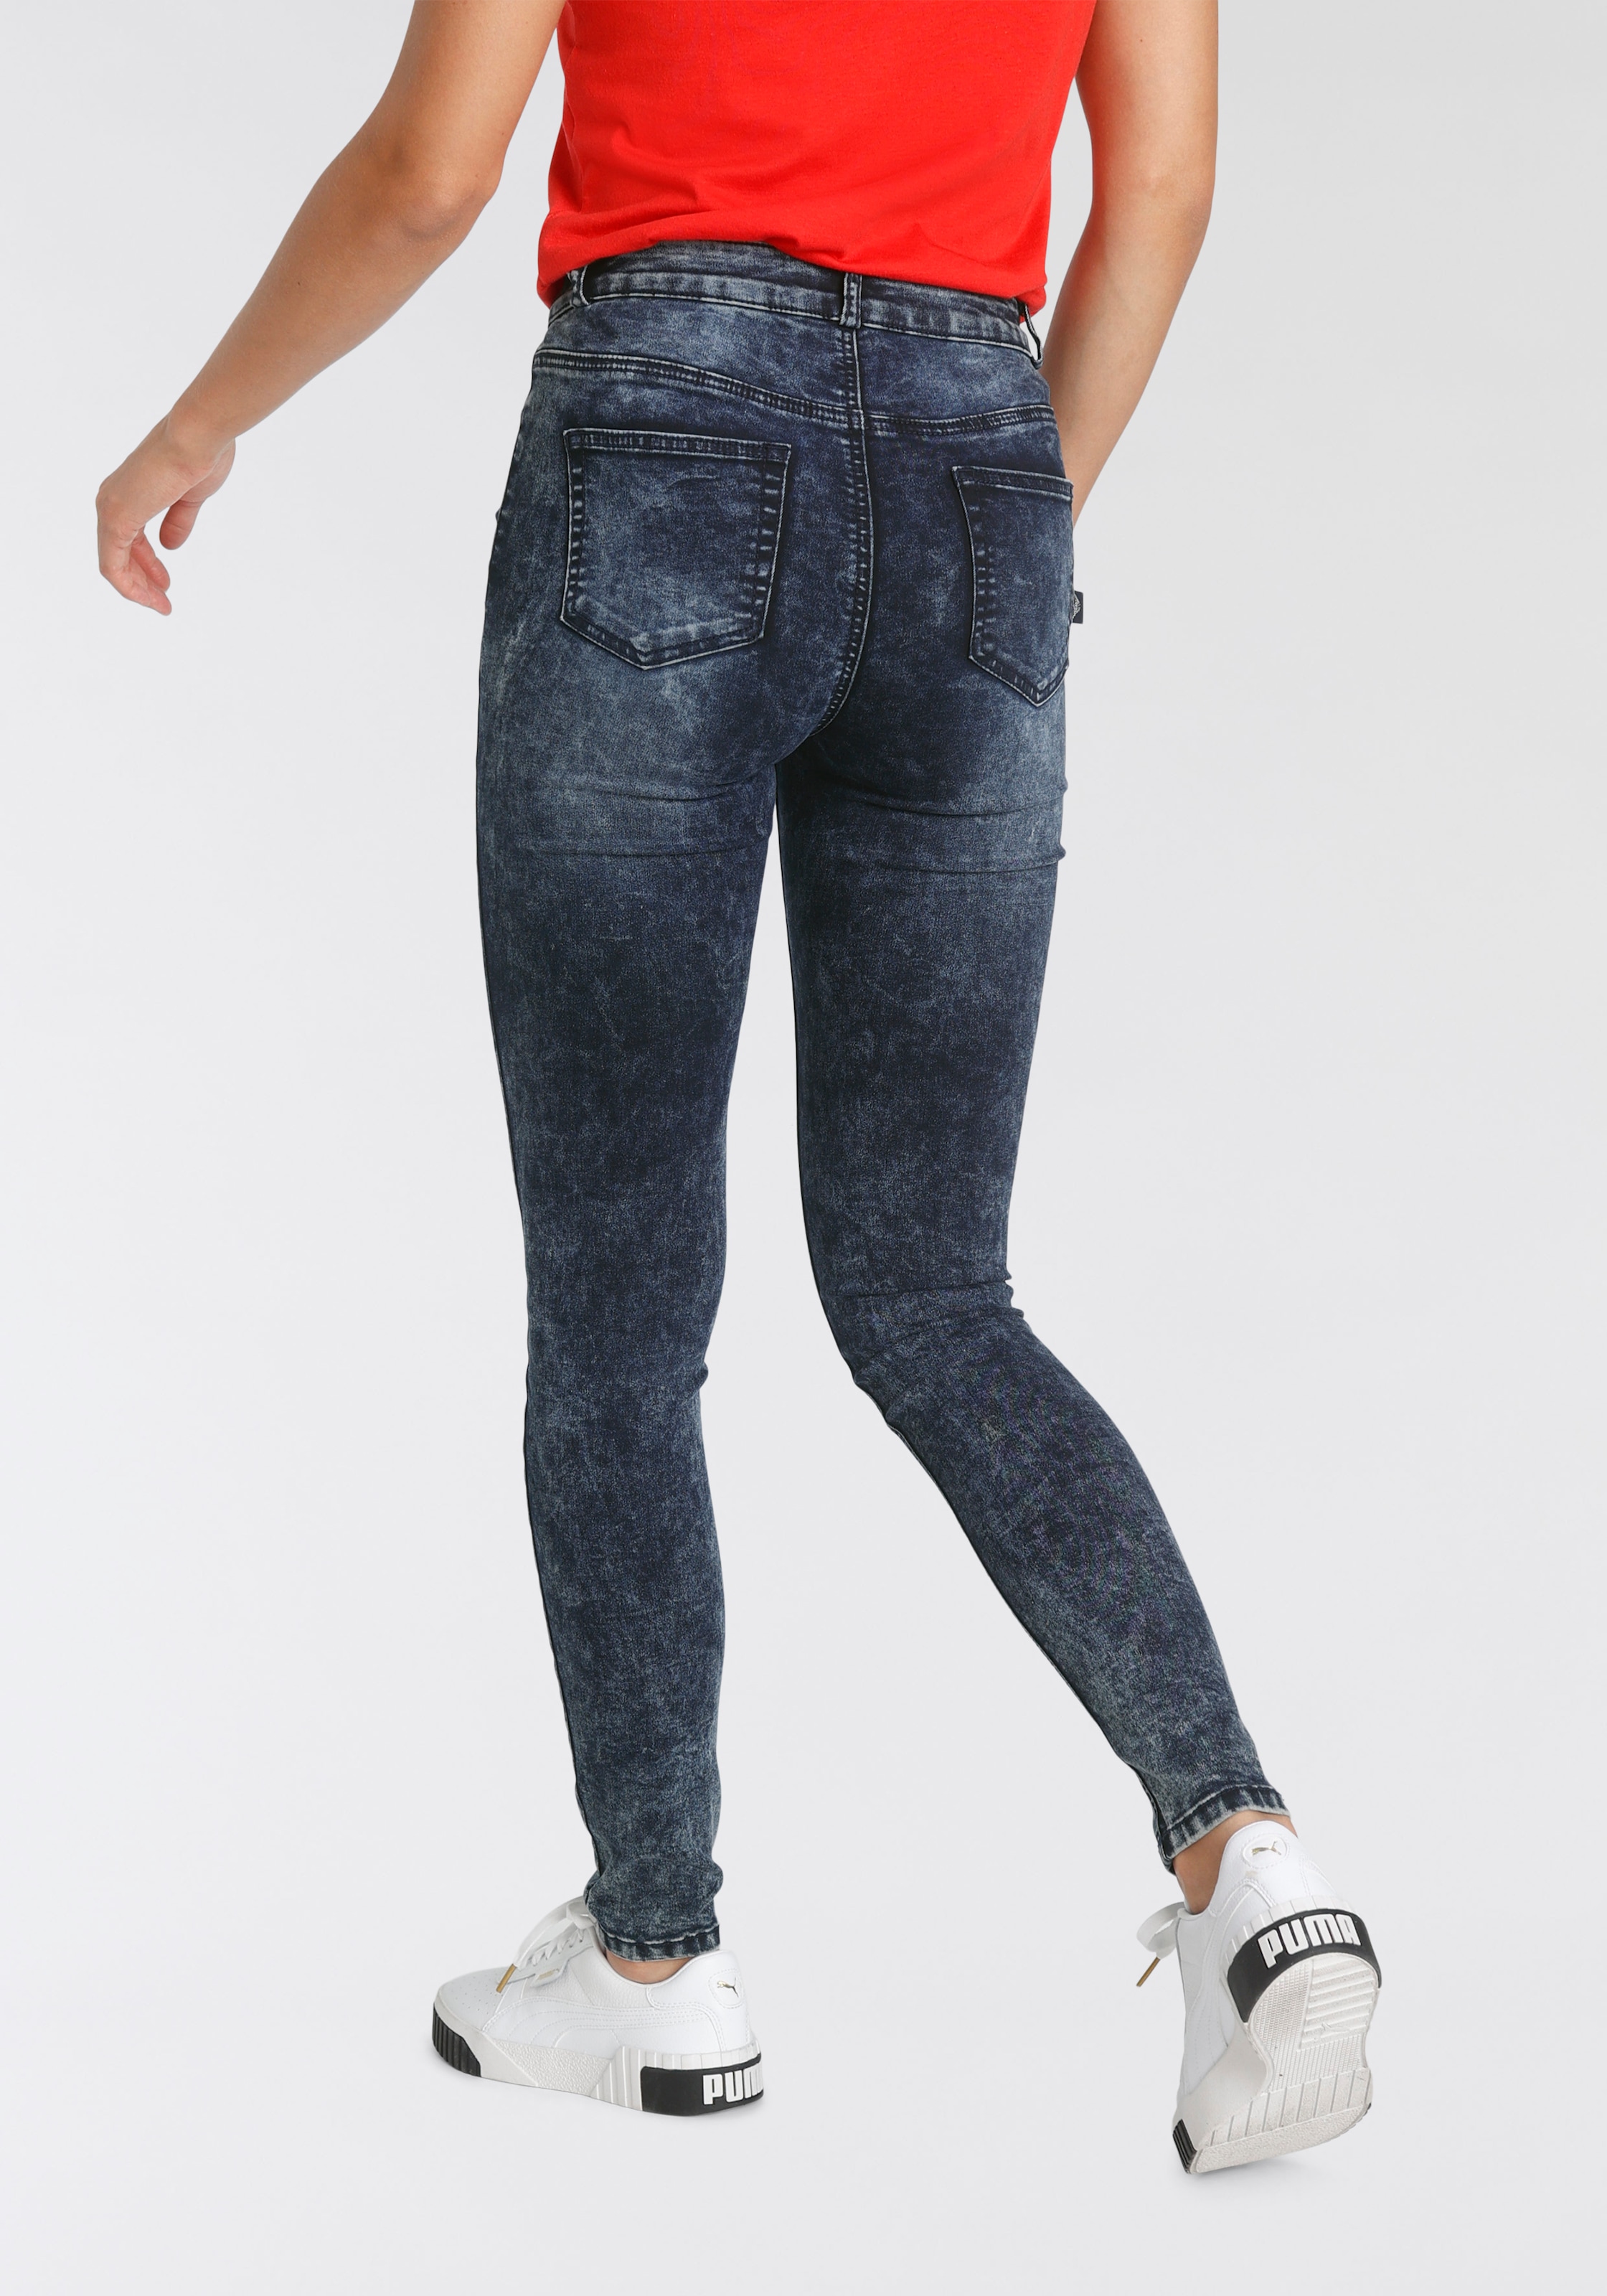 Arizona Skinny-fit-Jeans moon Stretch Jeans »Ultra online washed«, kaufen Moonwashed